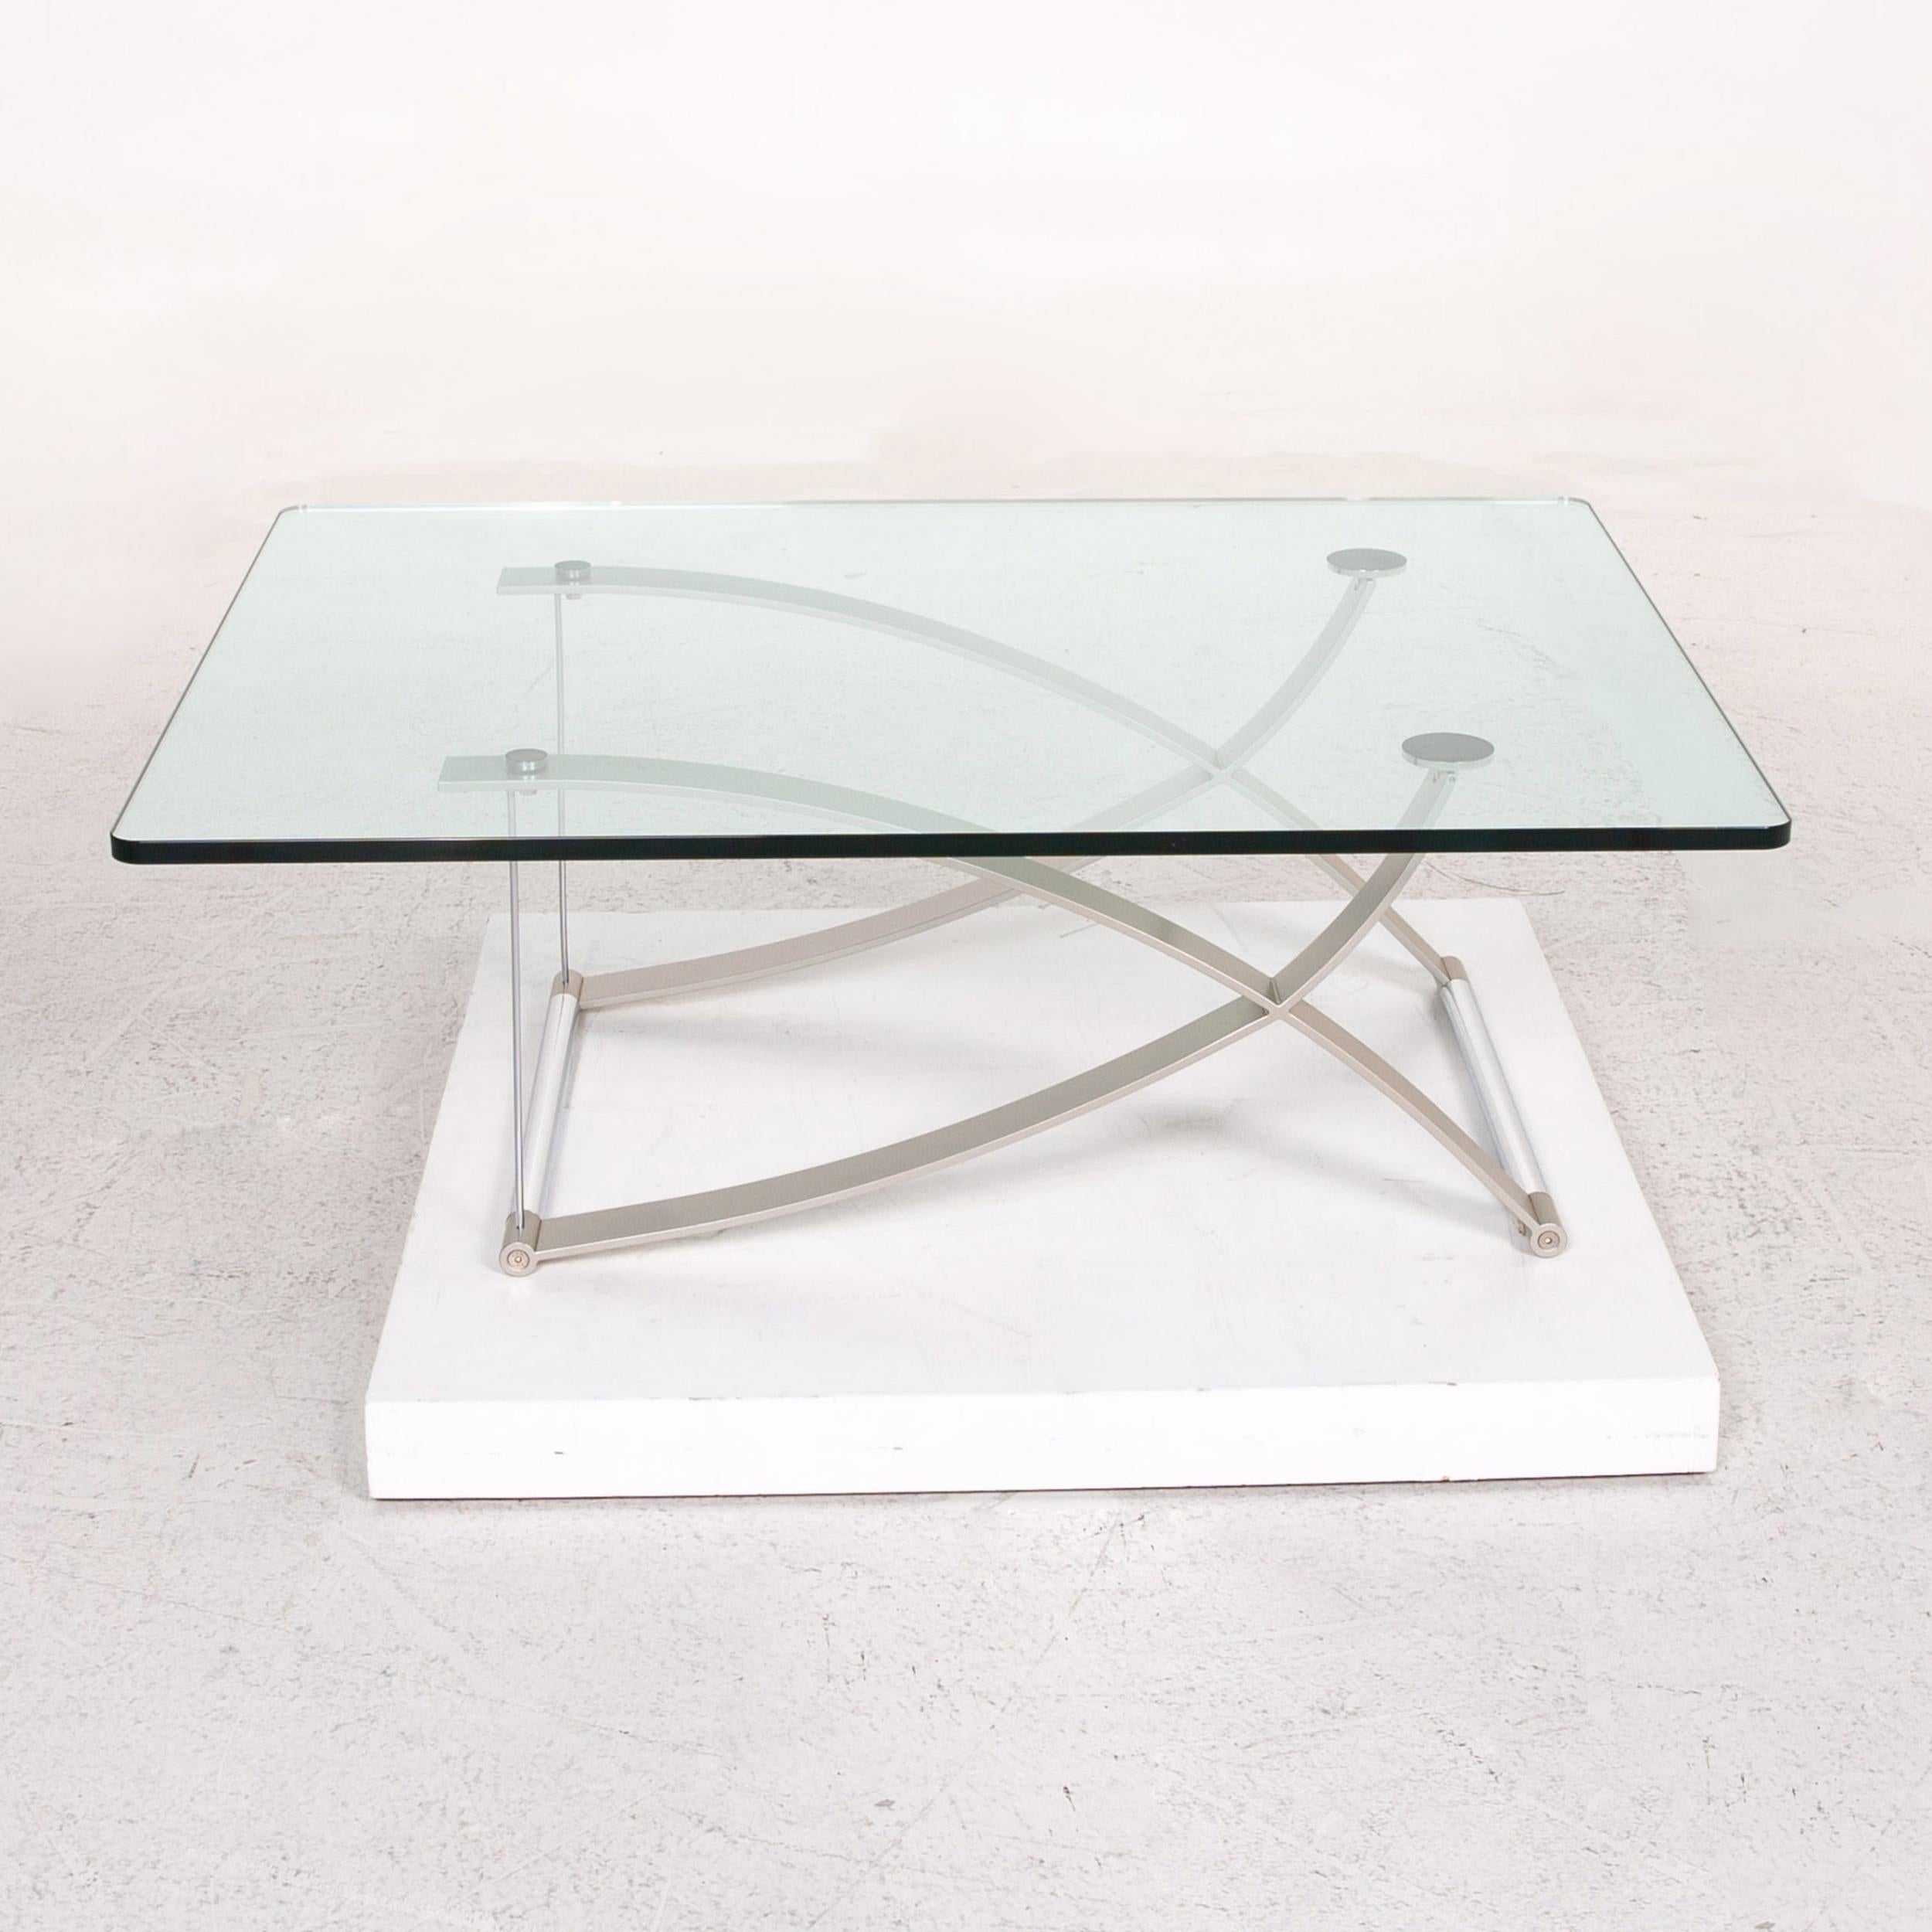 Contemporary Rolf Benz Glass Coffee Table Metal Table